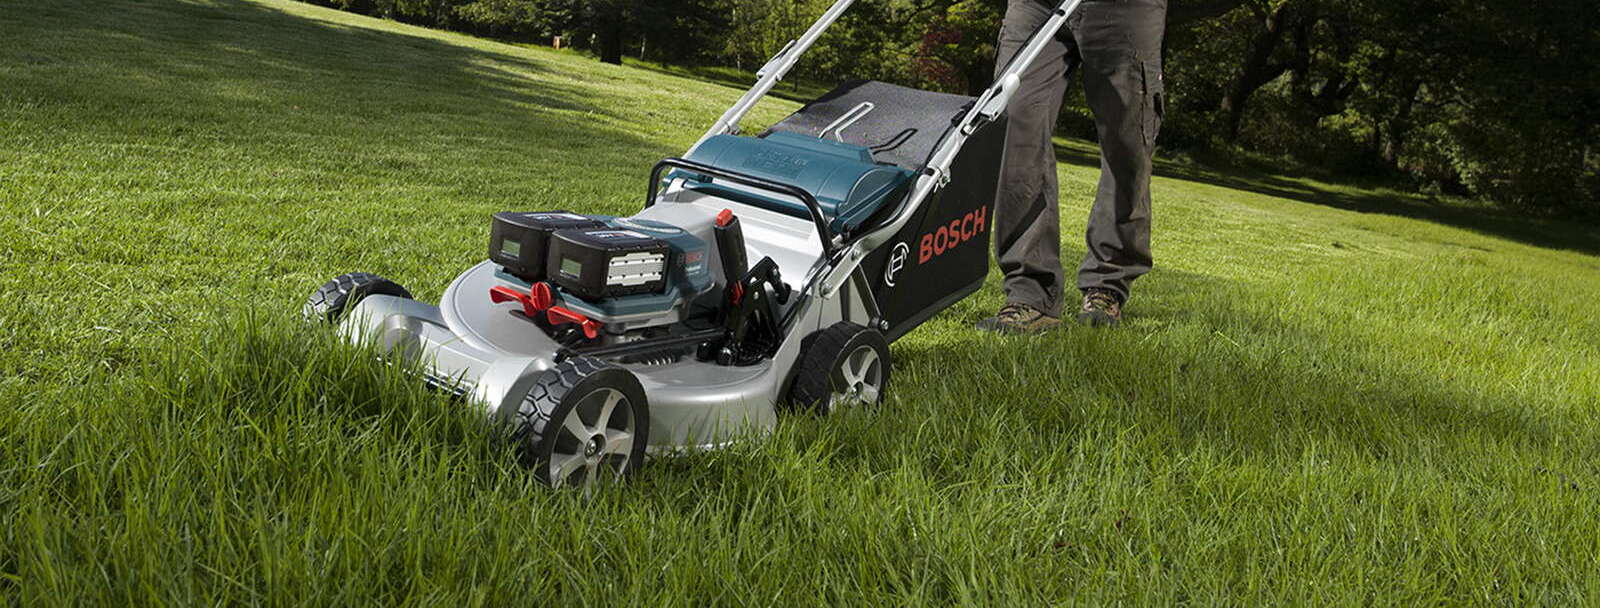 Best Battery Powered Lawn Mowers in 2023 - Comparison tool & Buying Guide